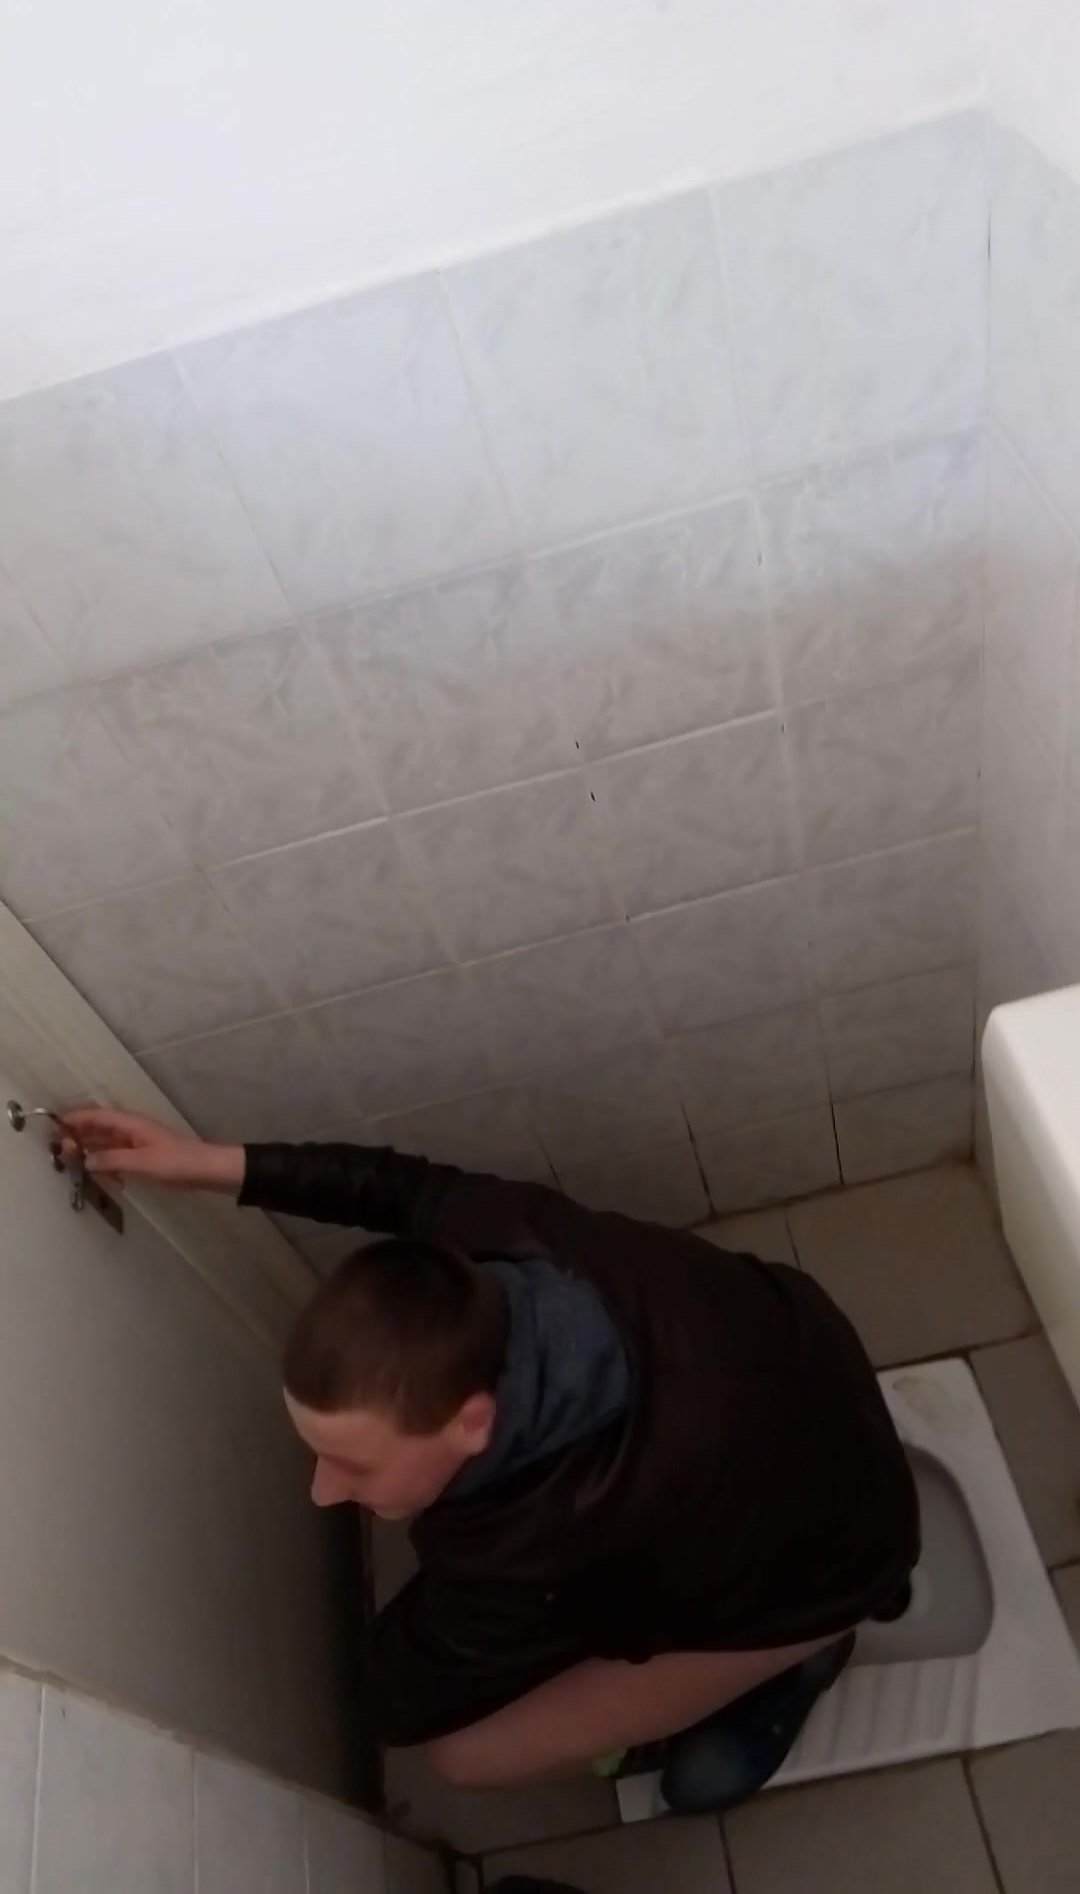 Spied shitting in squat toilet